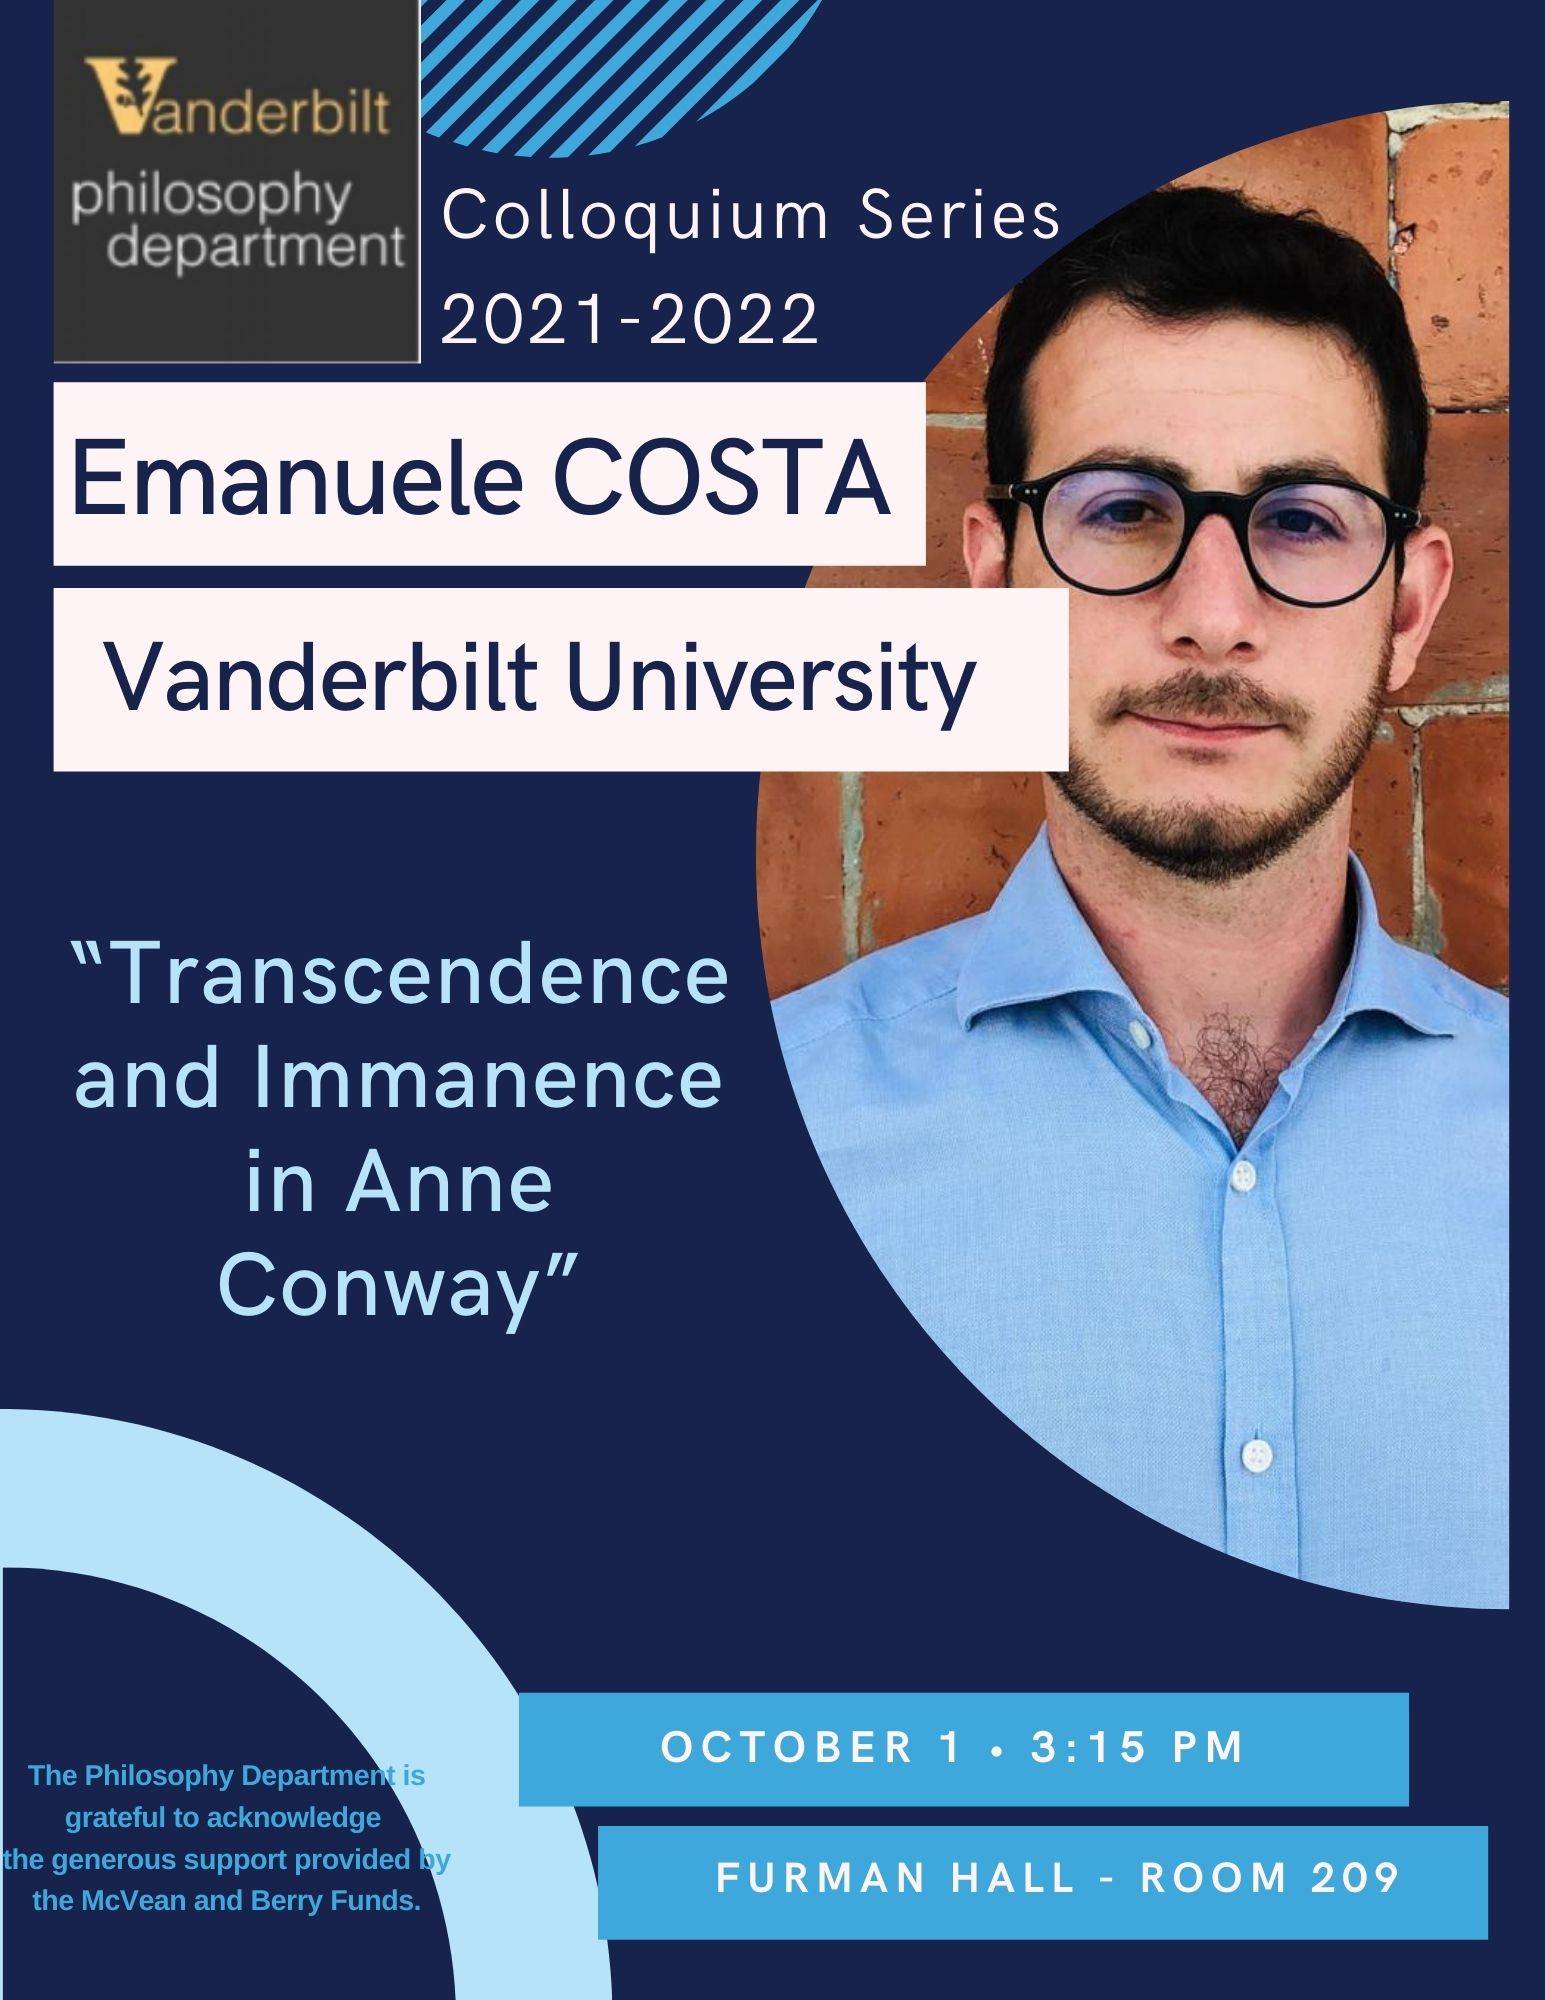 Emanuele Costa will present a talk titled "Transcendence and Immanence in Anne Conway."